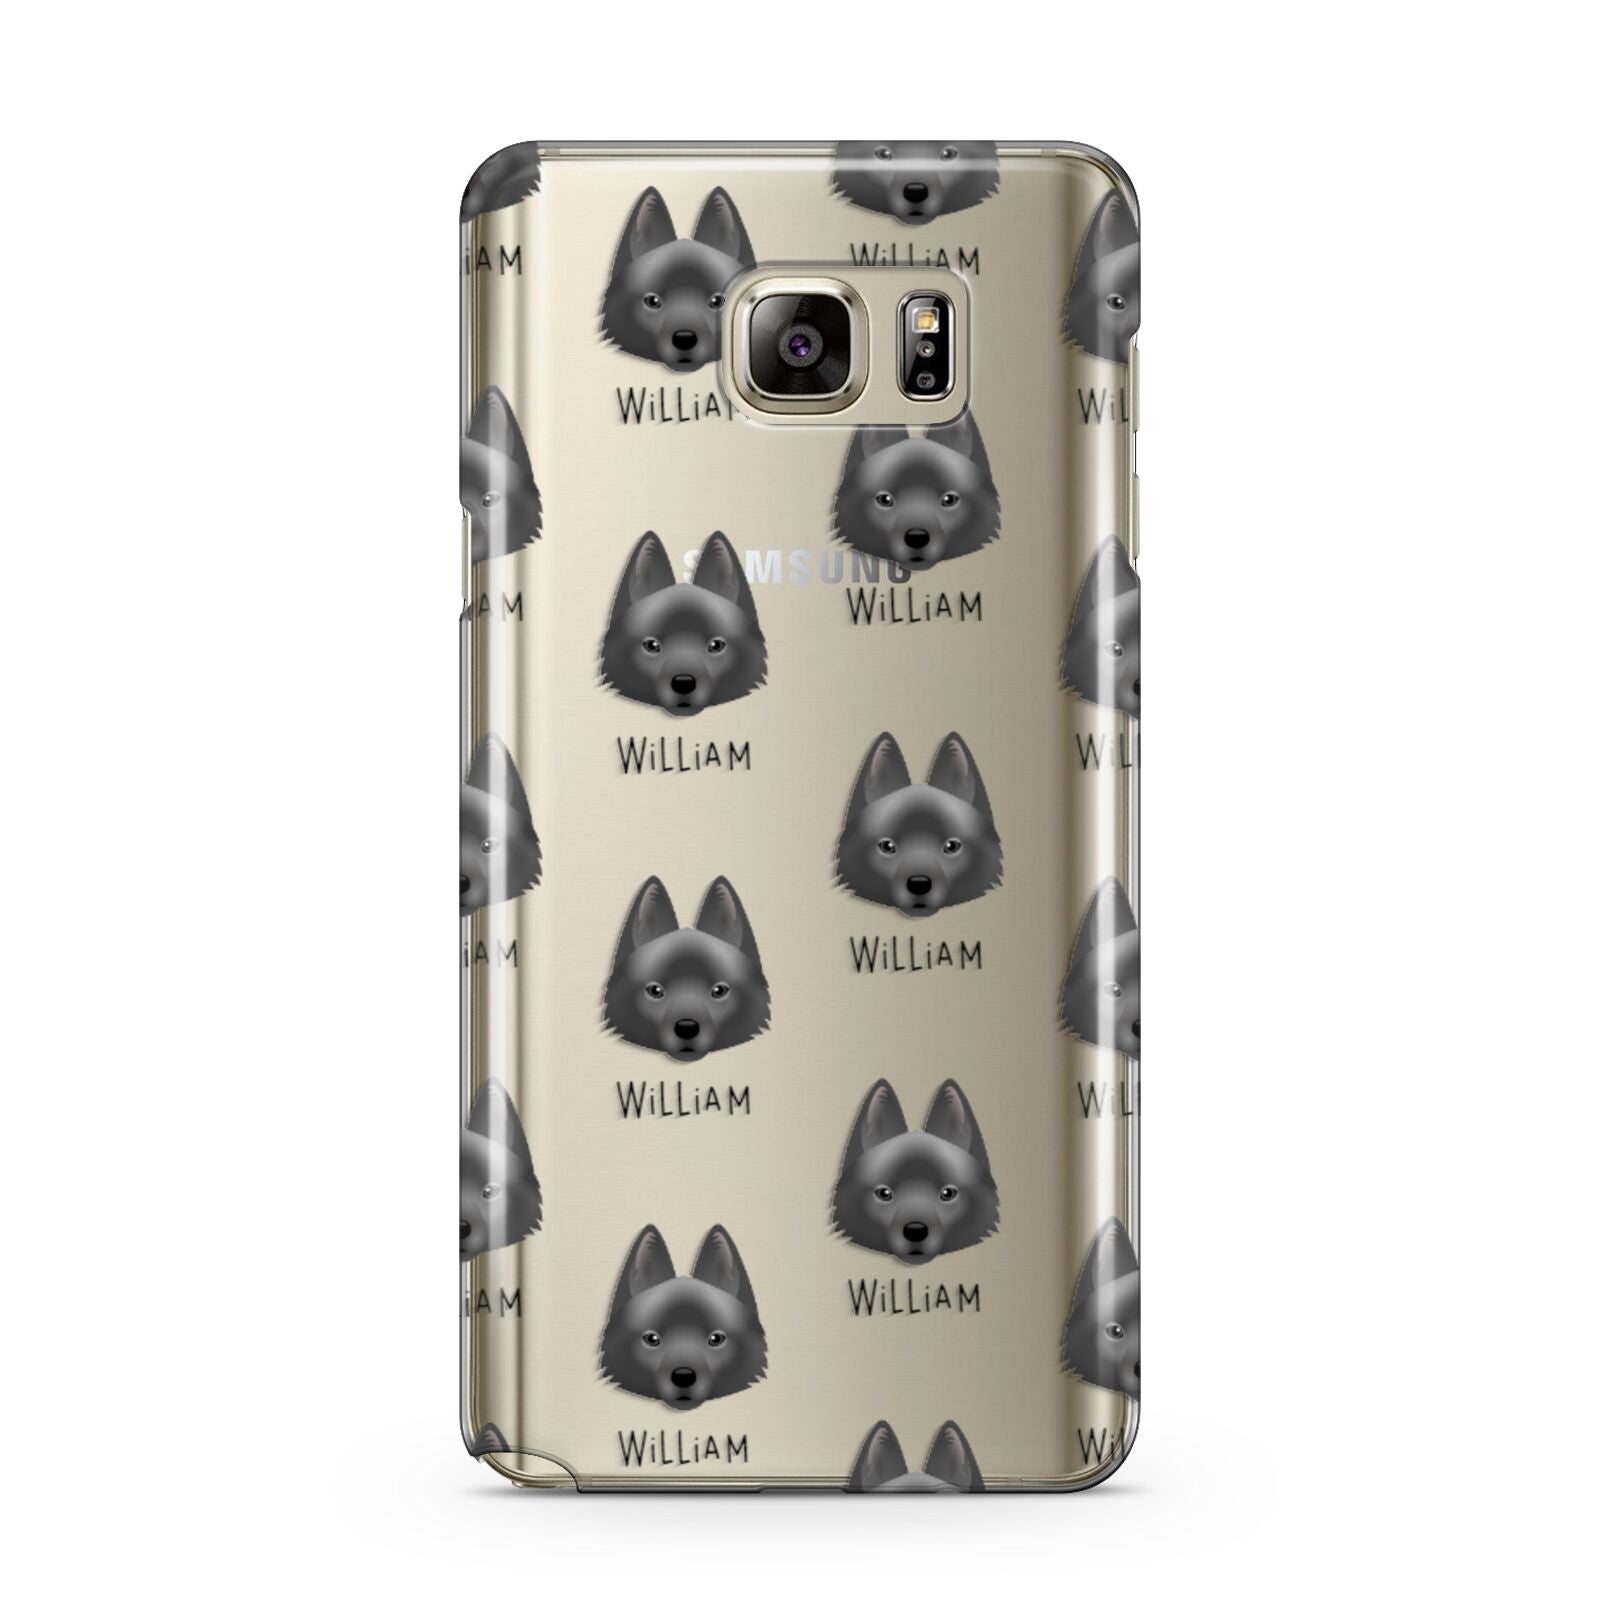 Schipperke Icon with Name Samsung Galaxy Note 5 Case